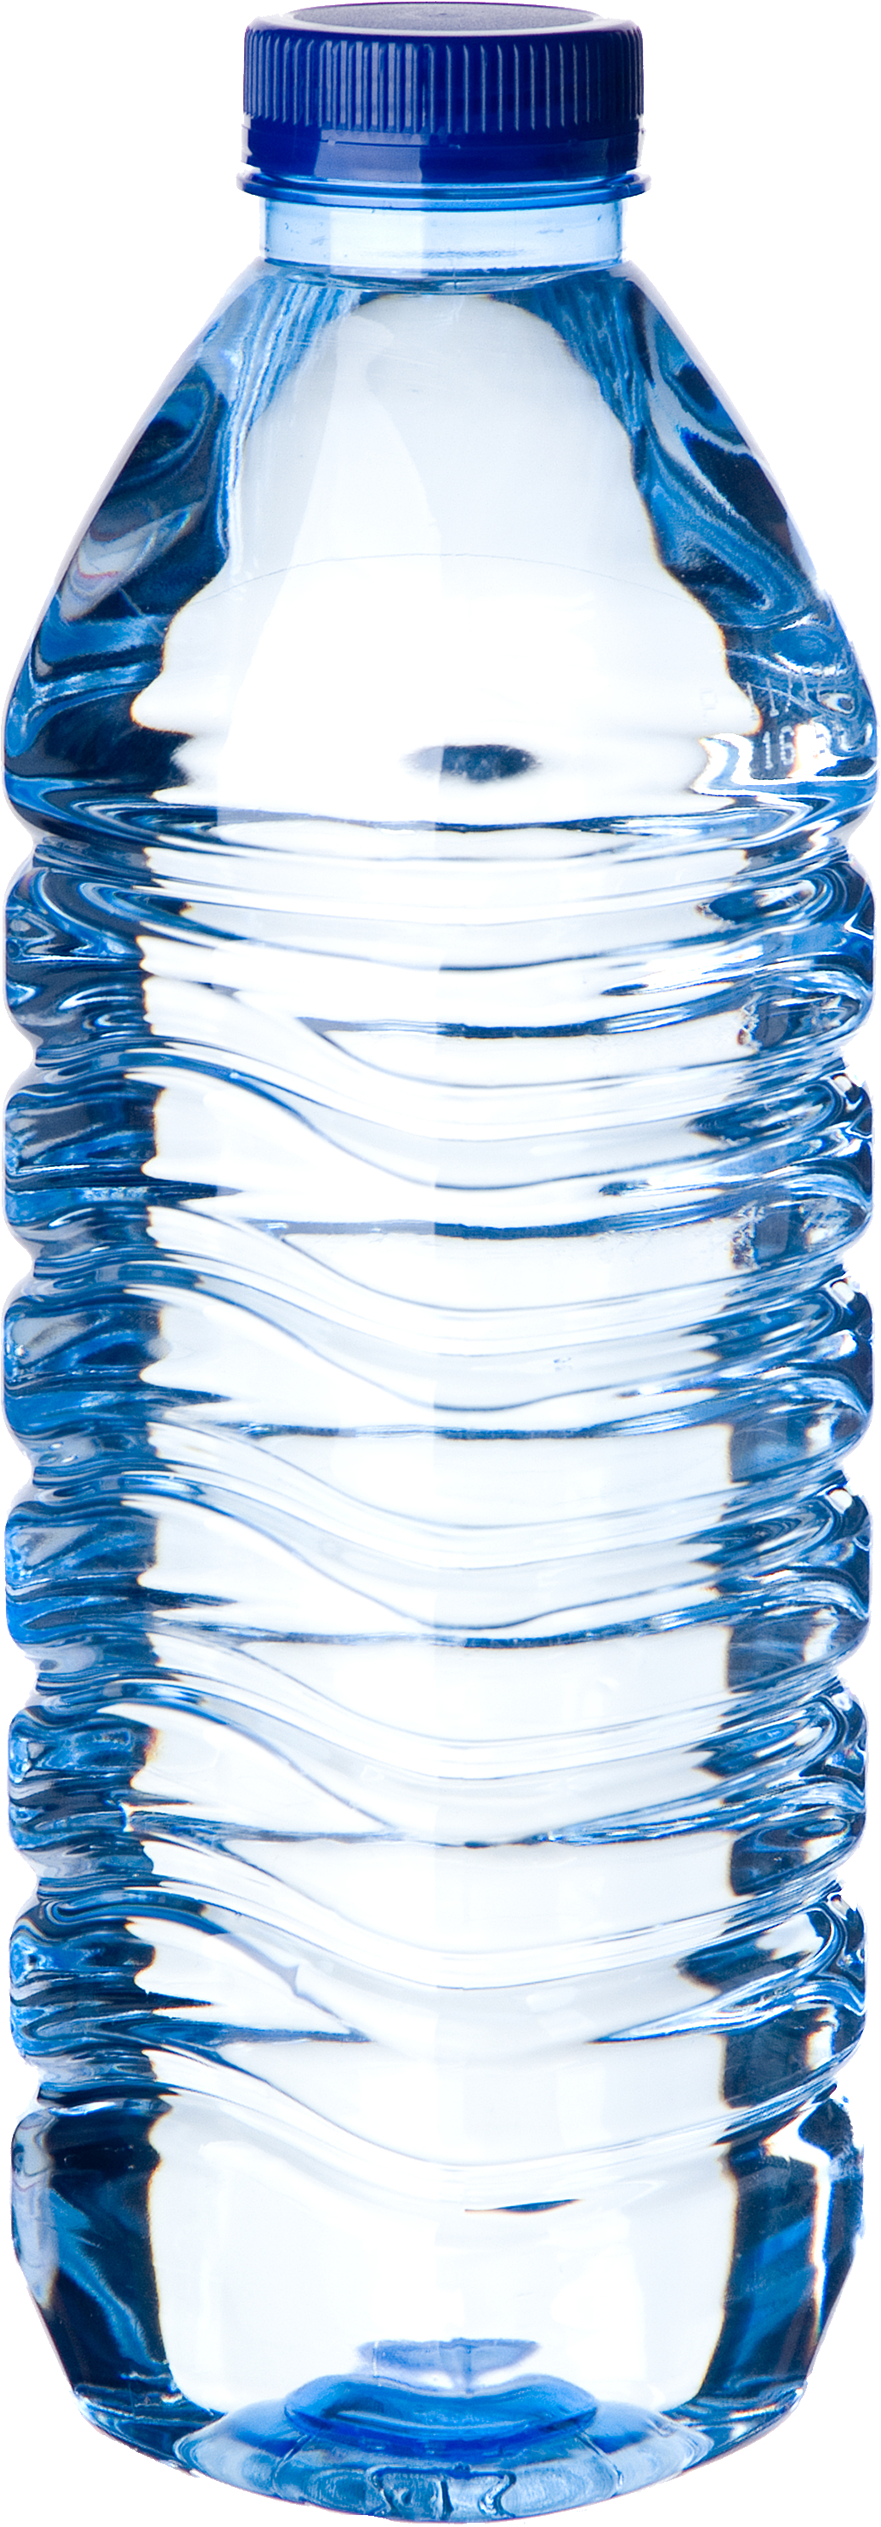 Water bottle PNG images free download.